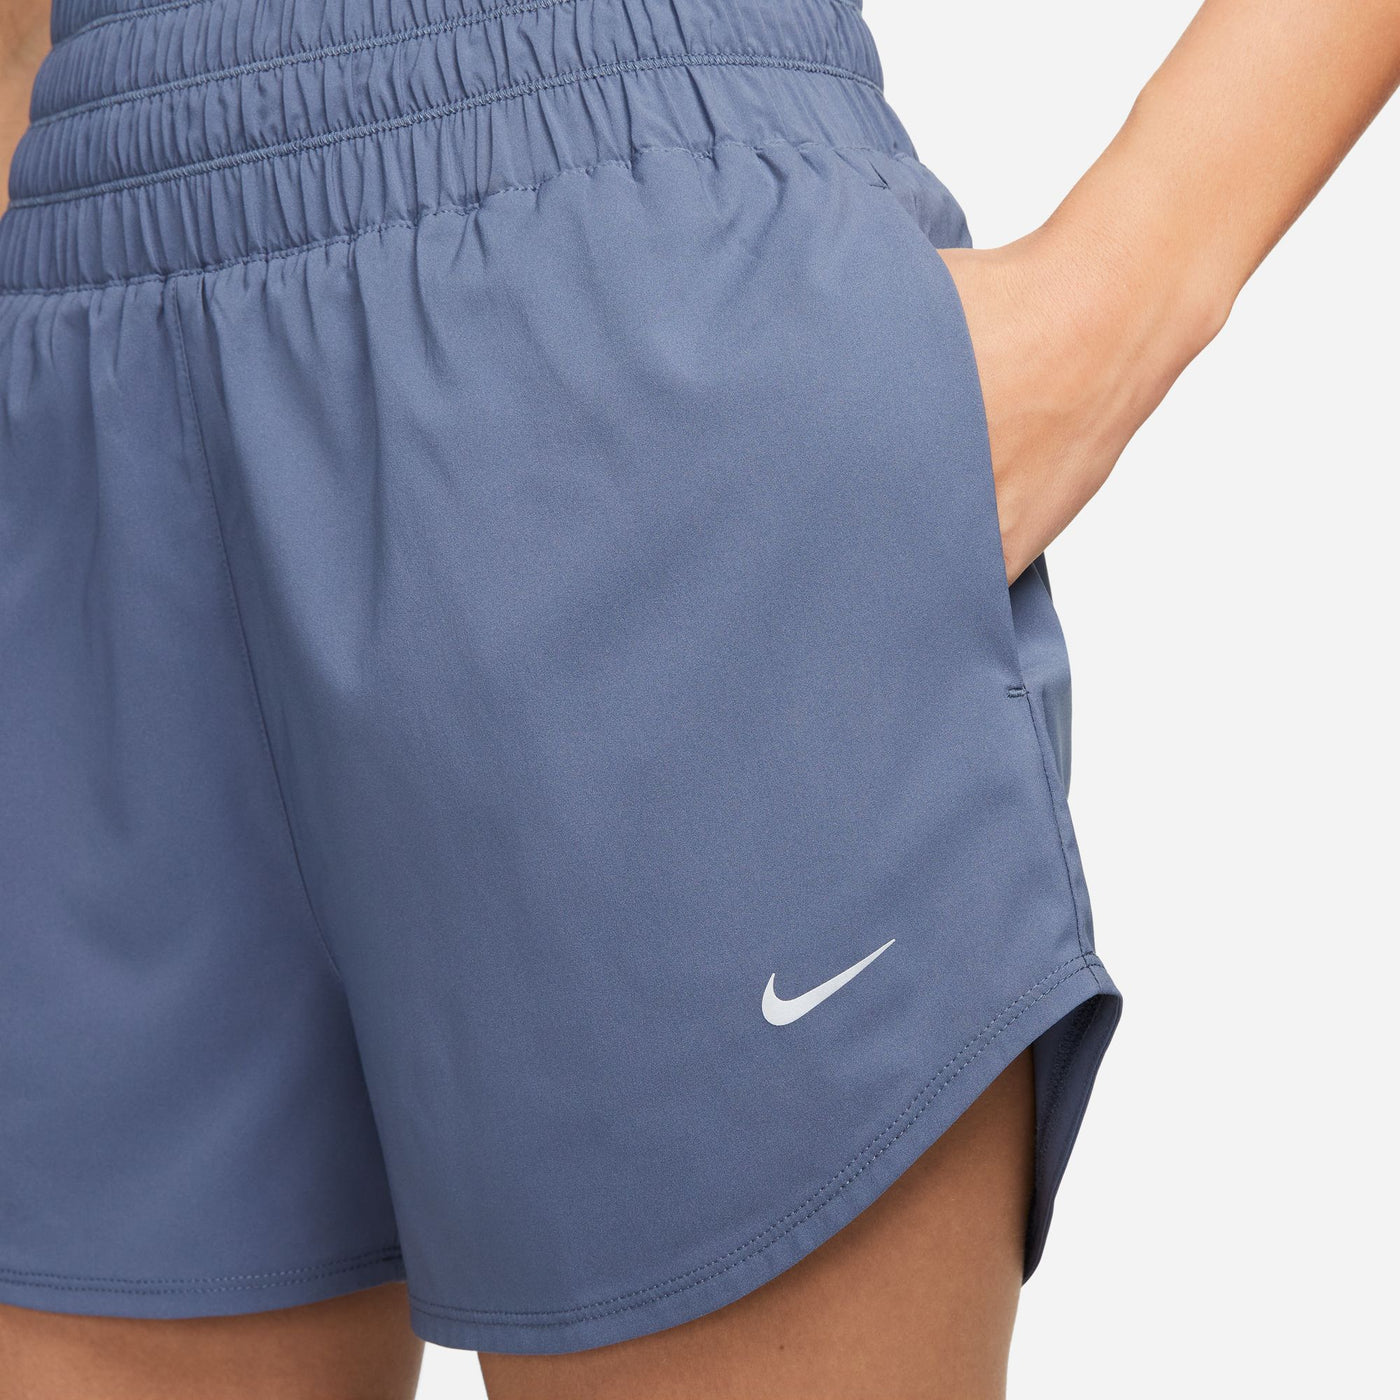 Women's Nike Dri-FIT Ultra High-Waisted 3" Brief-Lined Shorts - DX6642-491